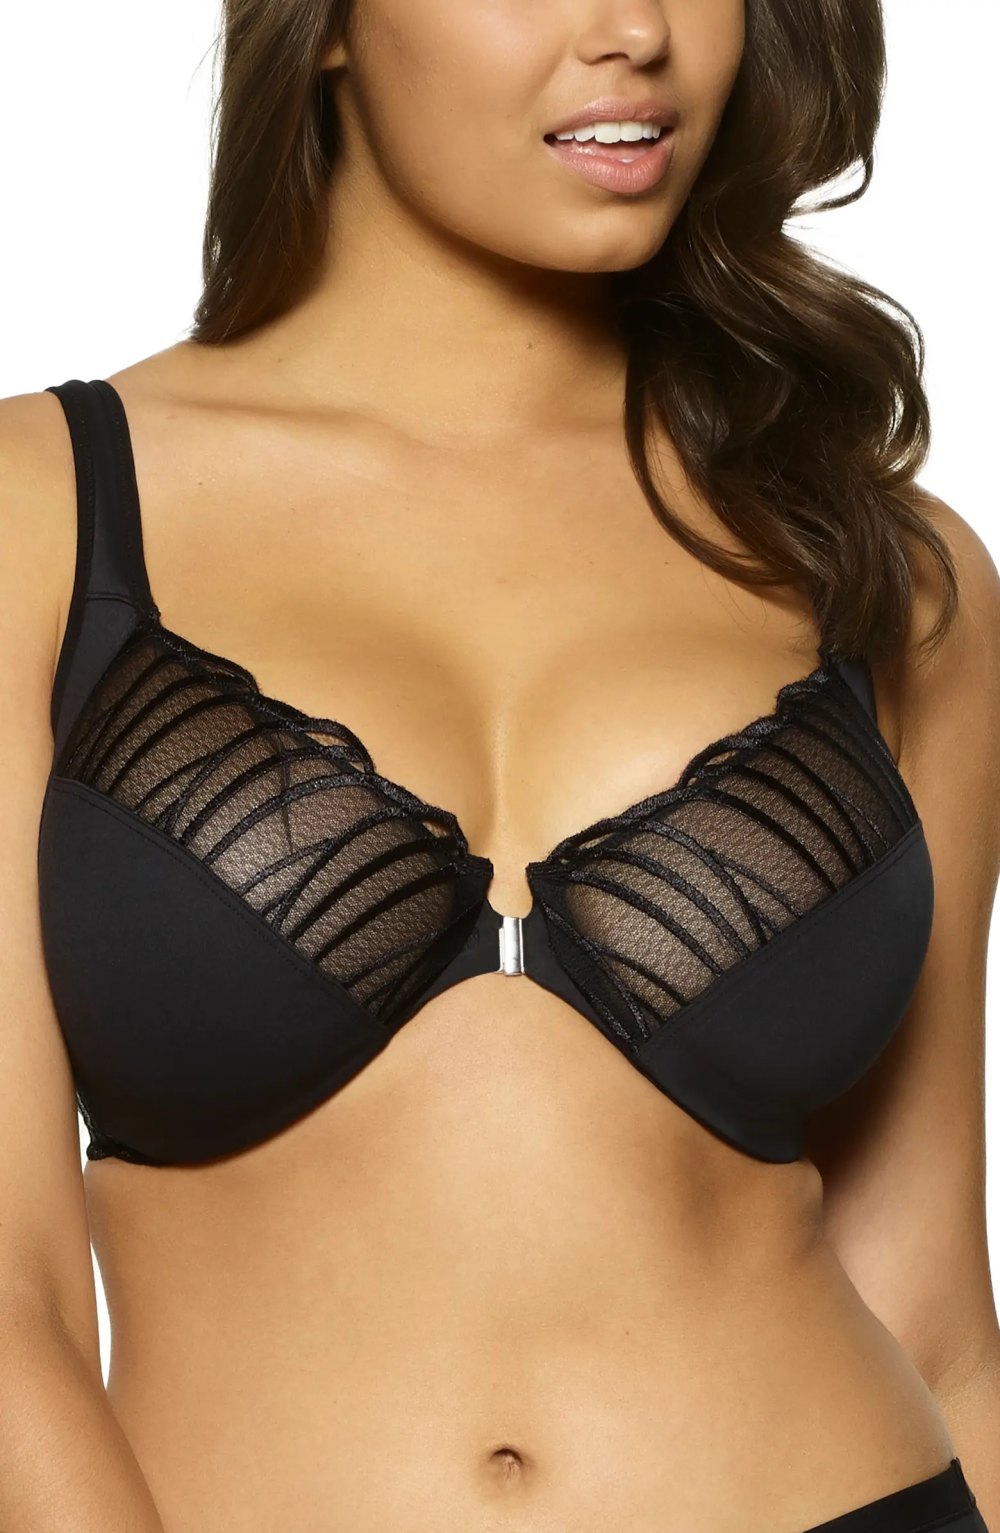 Comfort Breast Reducing Bra With Lift C H G Cup